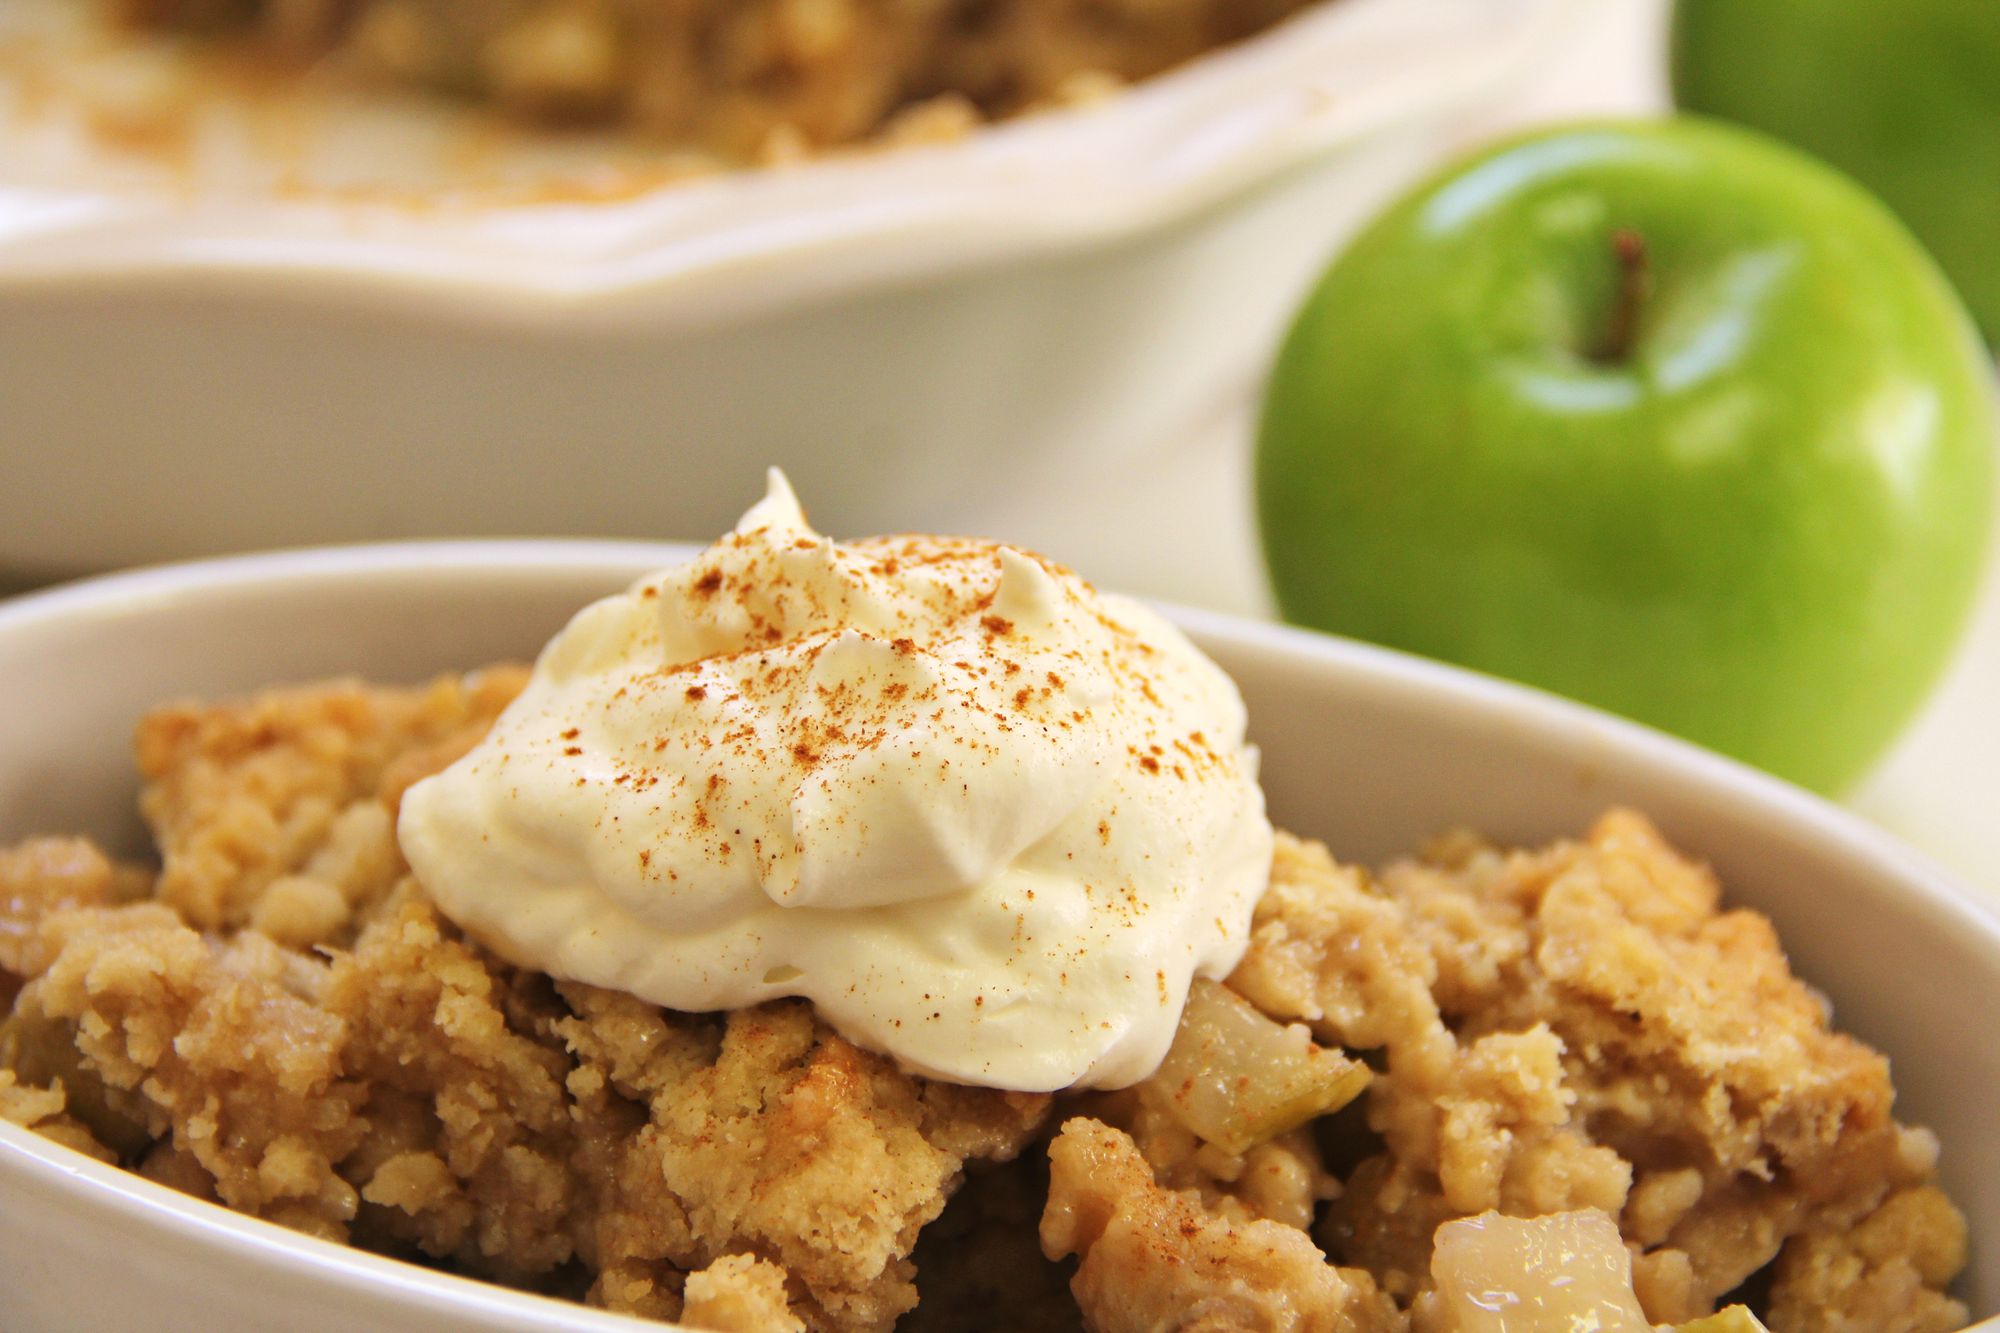 Orchard Crumble